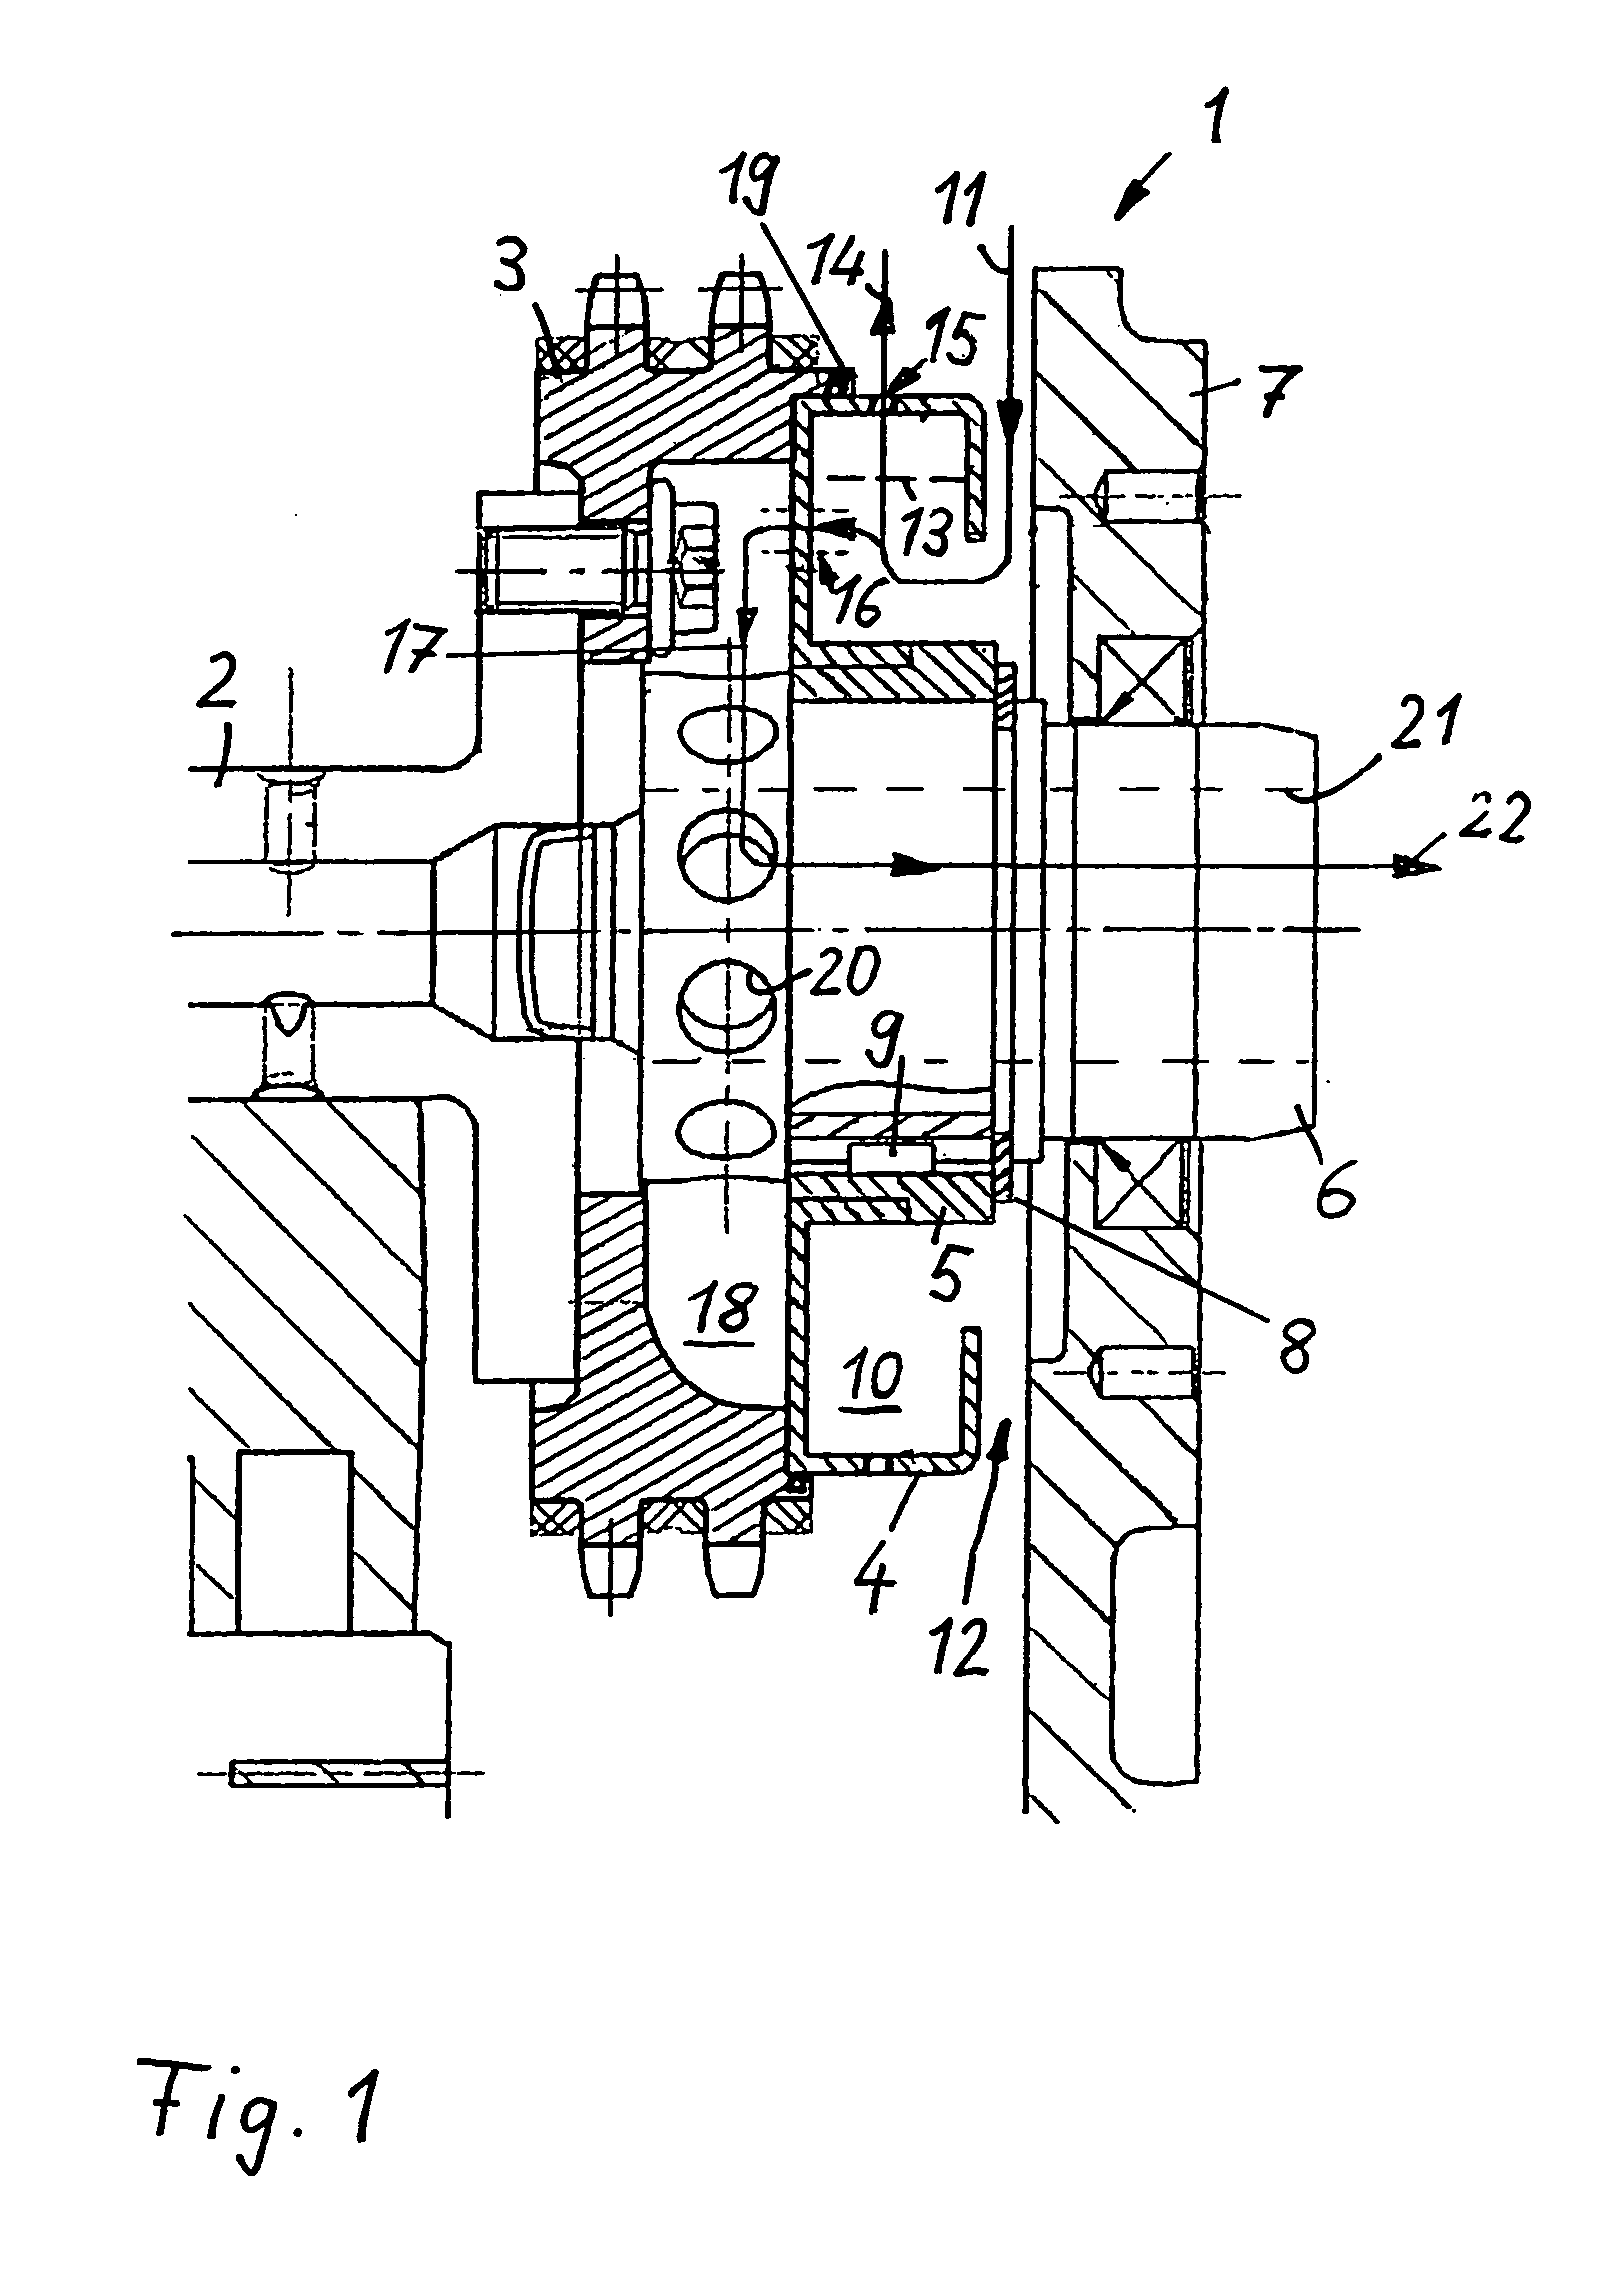 Centrifugal oil separator in an internal combustion engine